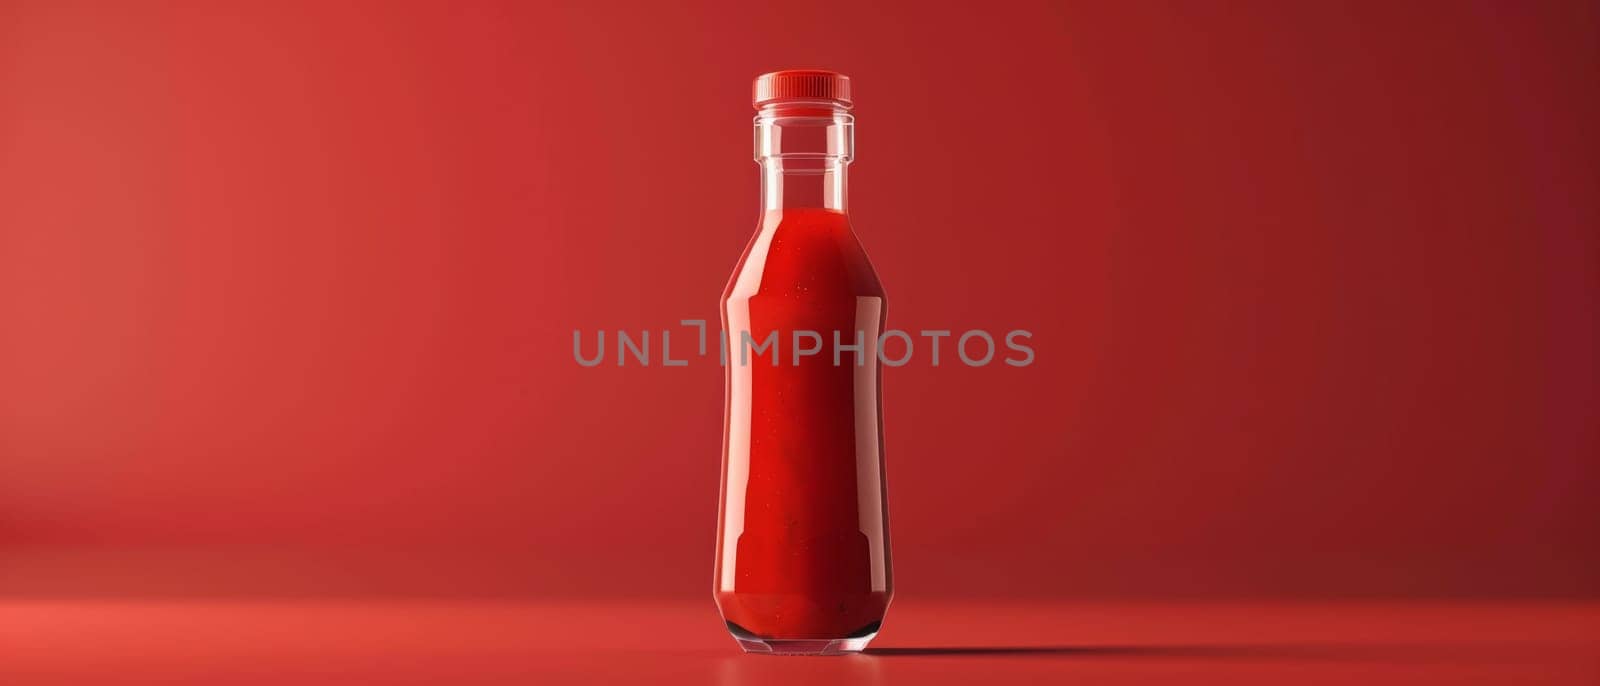 A single, sleek bottle filled with bright red ketchup stands against a vibrant red backdrop, emphasizing simplicity and cleanliness. by sfinks